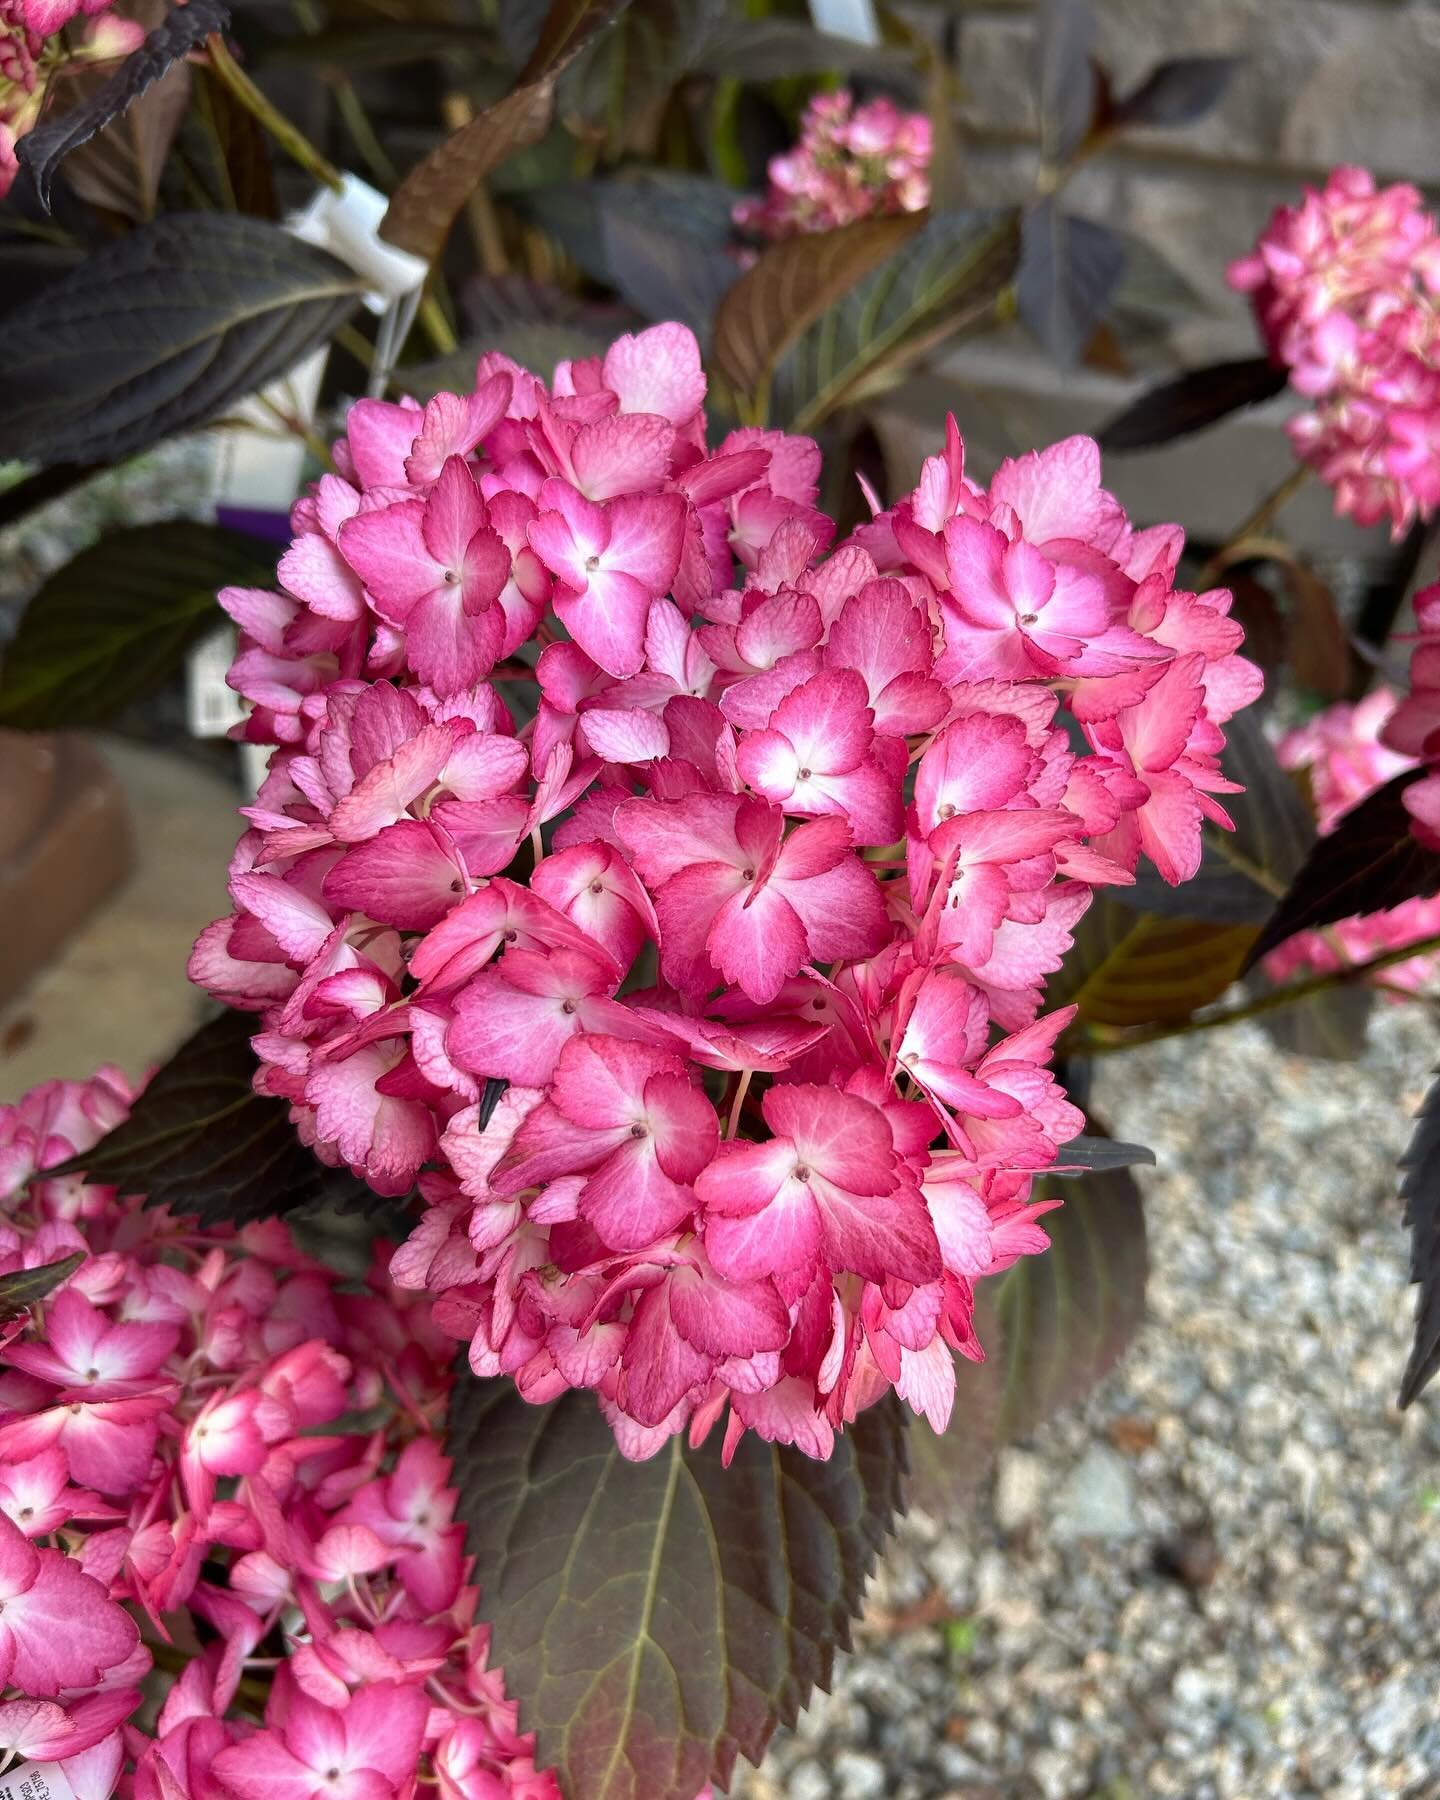 😍These eclipse hydrangea are 🔥

🏡The dark leaves contrast the cranberry blooms, making this a great statement plant in the landscape or in a container. It will grow to be 3-5&rsquo; tall and wide and likes morning sun and afternoon shade.